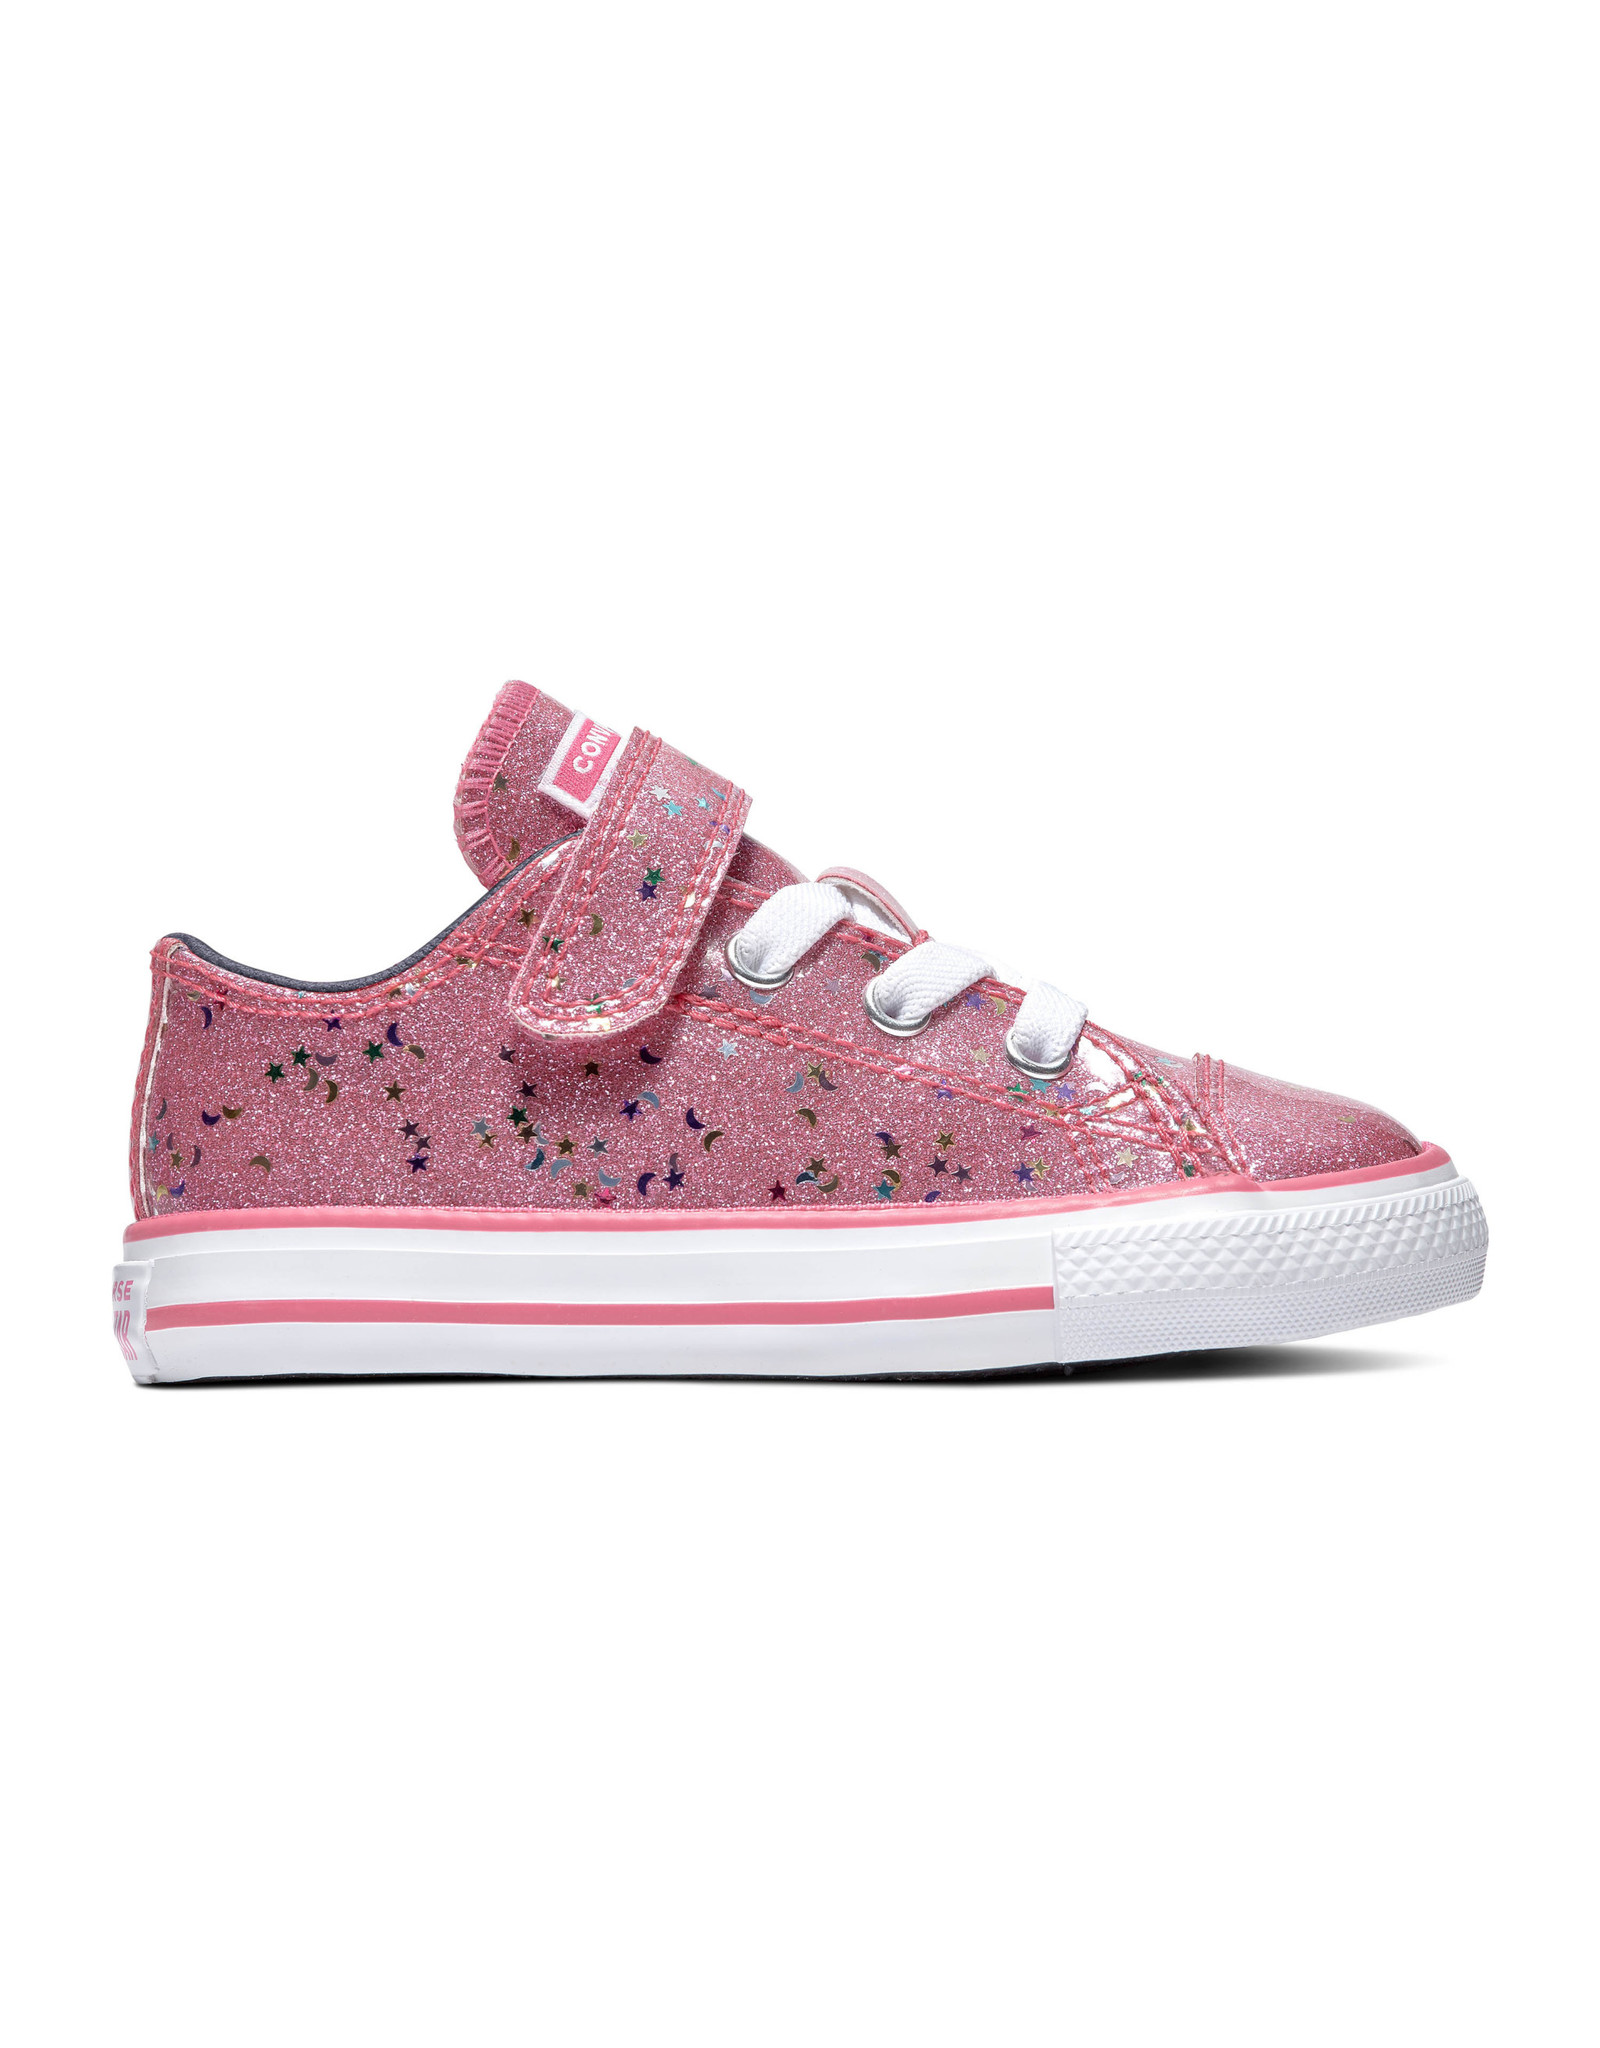 CHUCK TAYLOR ALL STAR 1V OX MOD PINK/OBSIDIAN/WHITE CKMOP-765110C